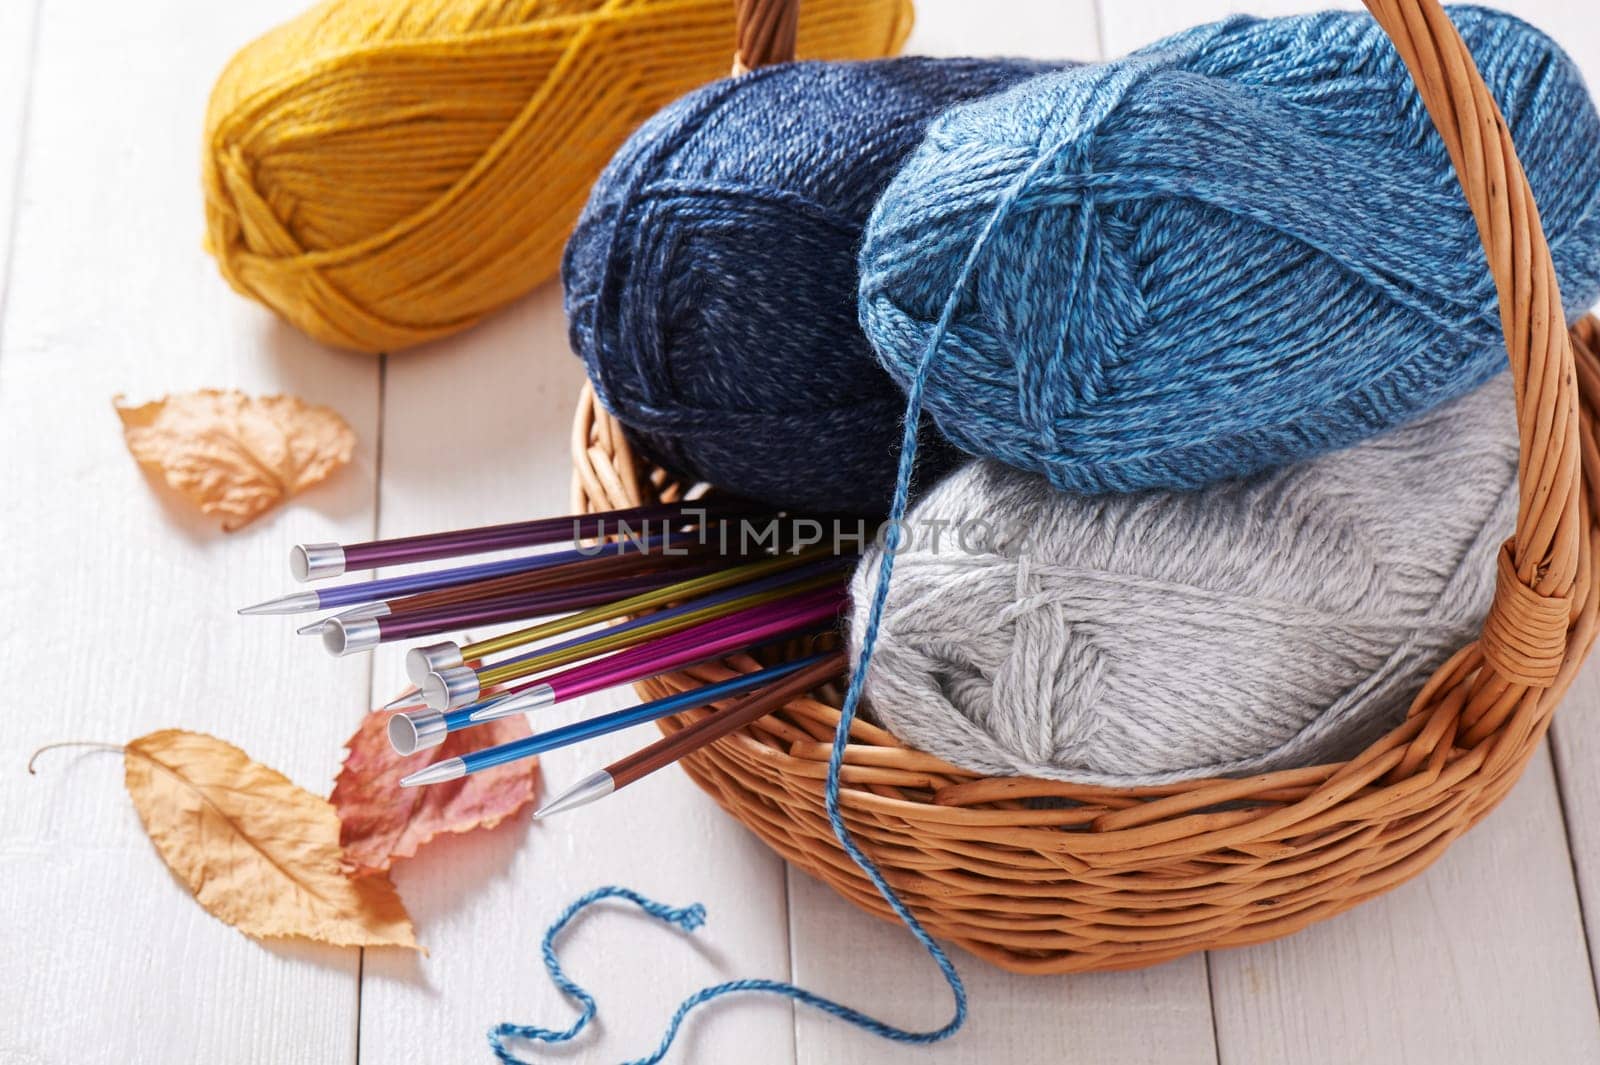 Skeins of yarn and knitting needles in basket